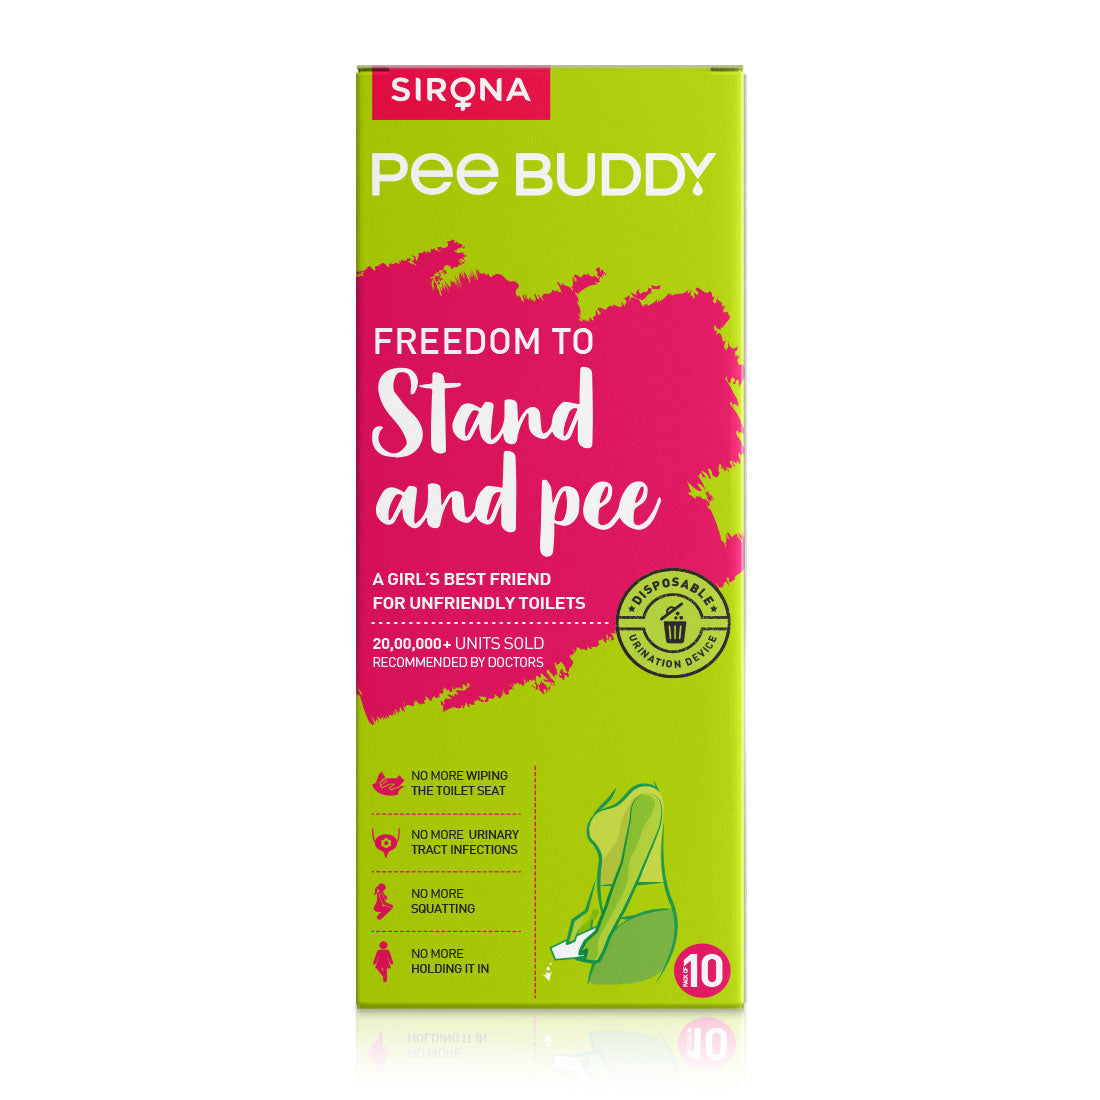 Peebuddy - Disposable, Portable Female Urination Device For Women - 5 Funnels